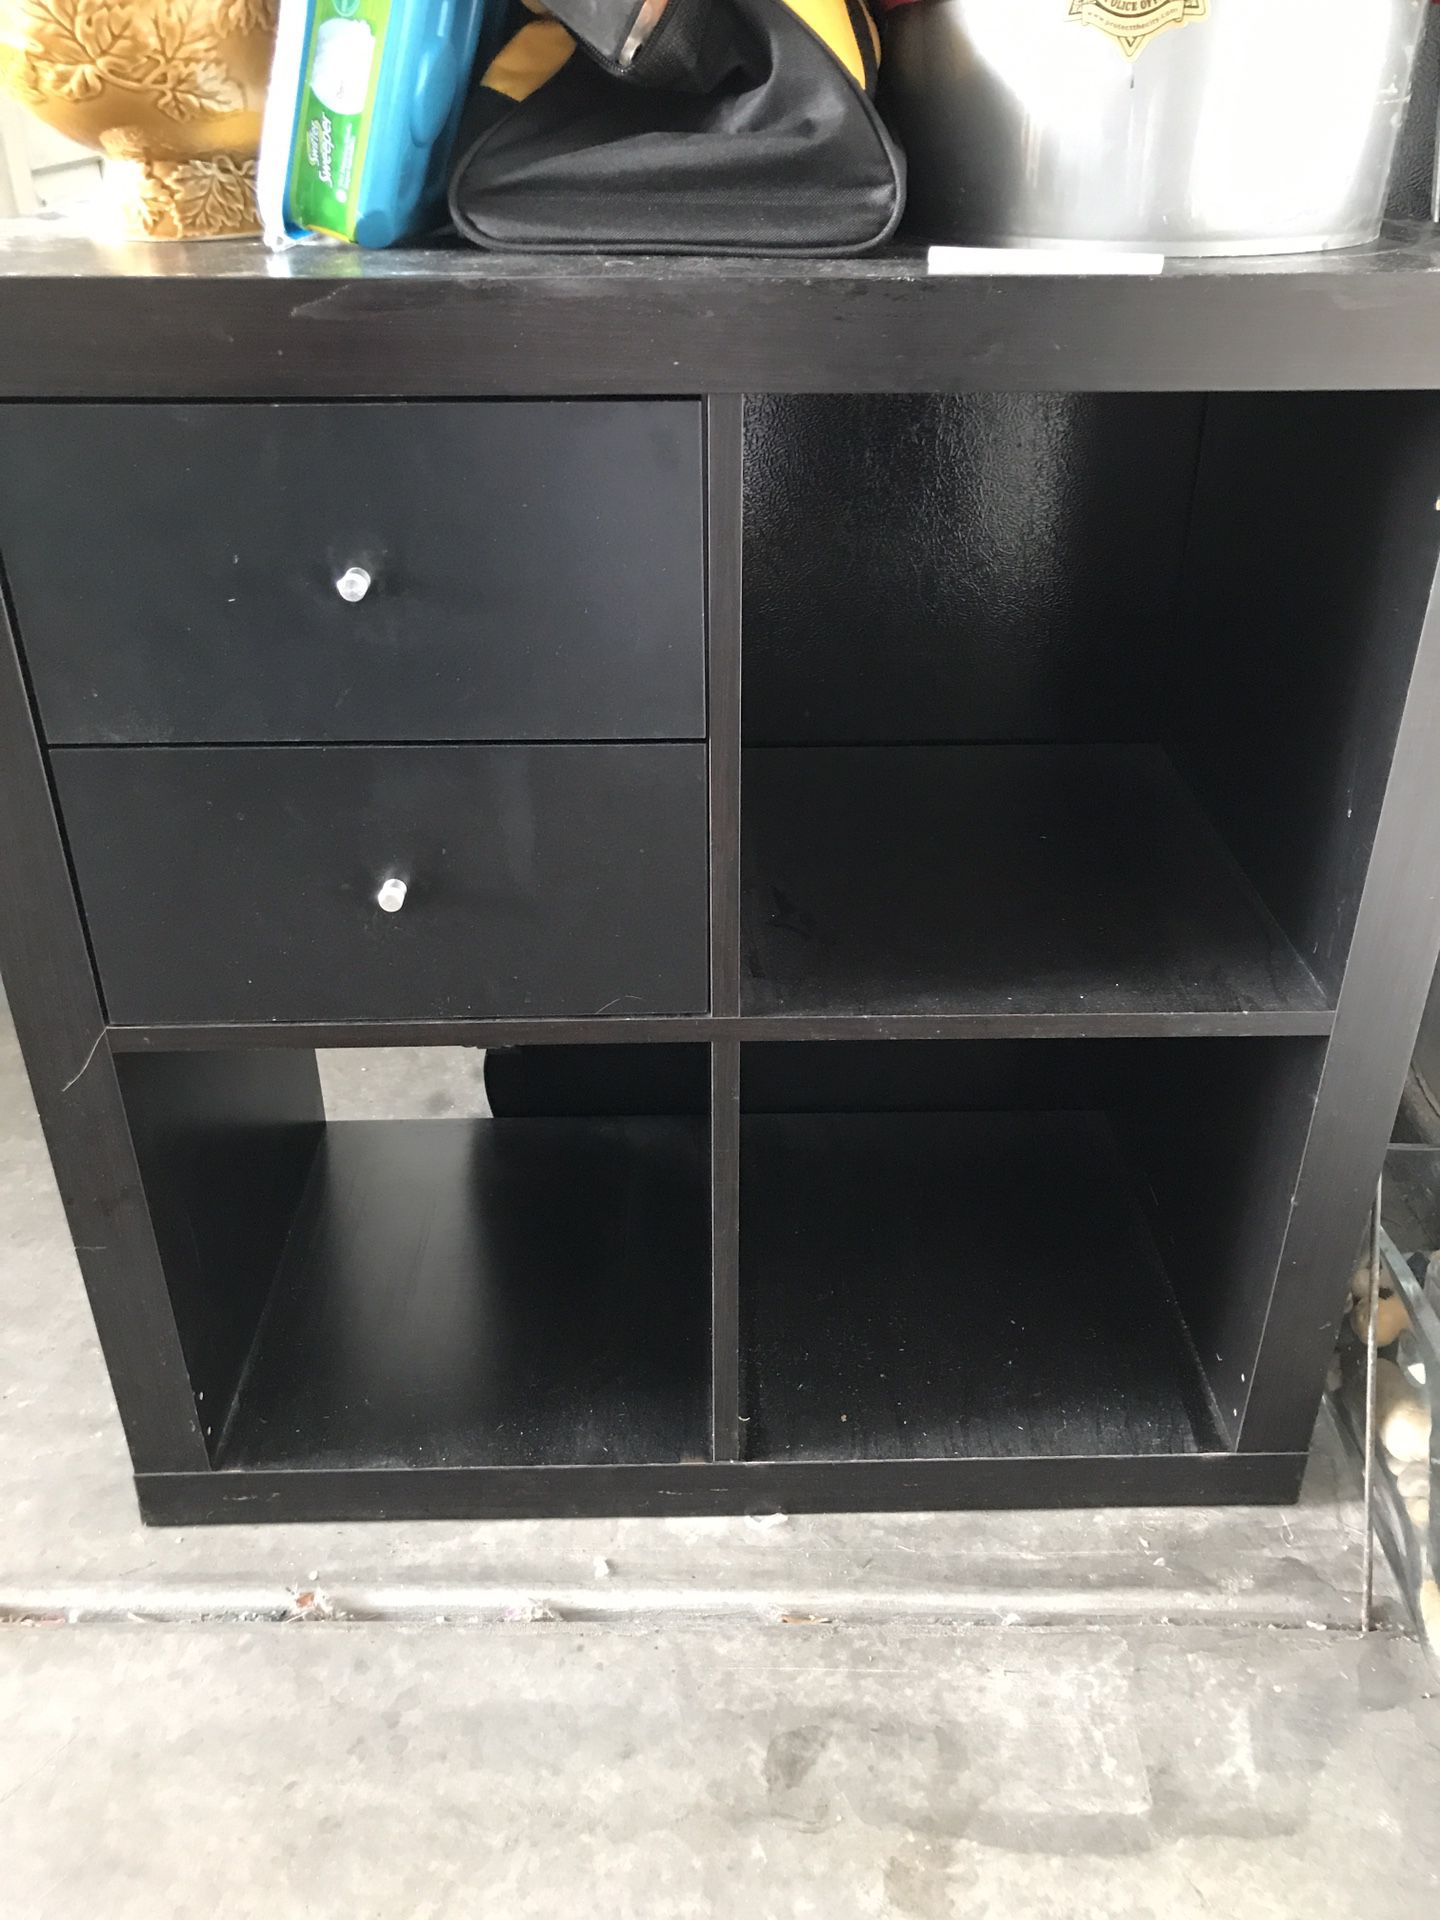 Shelf with cubby’s and 2 working drawers